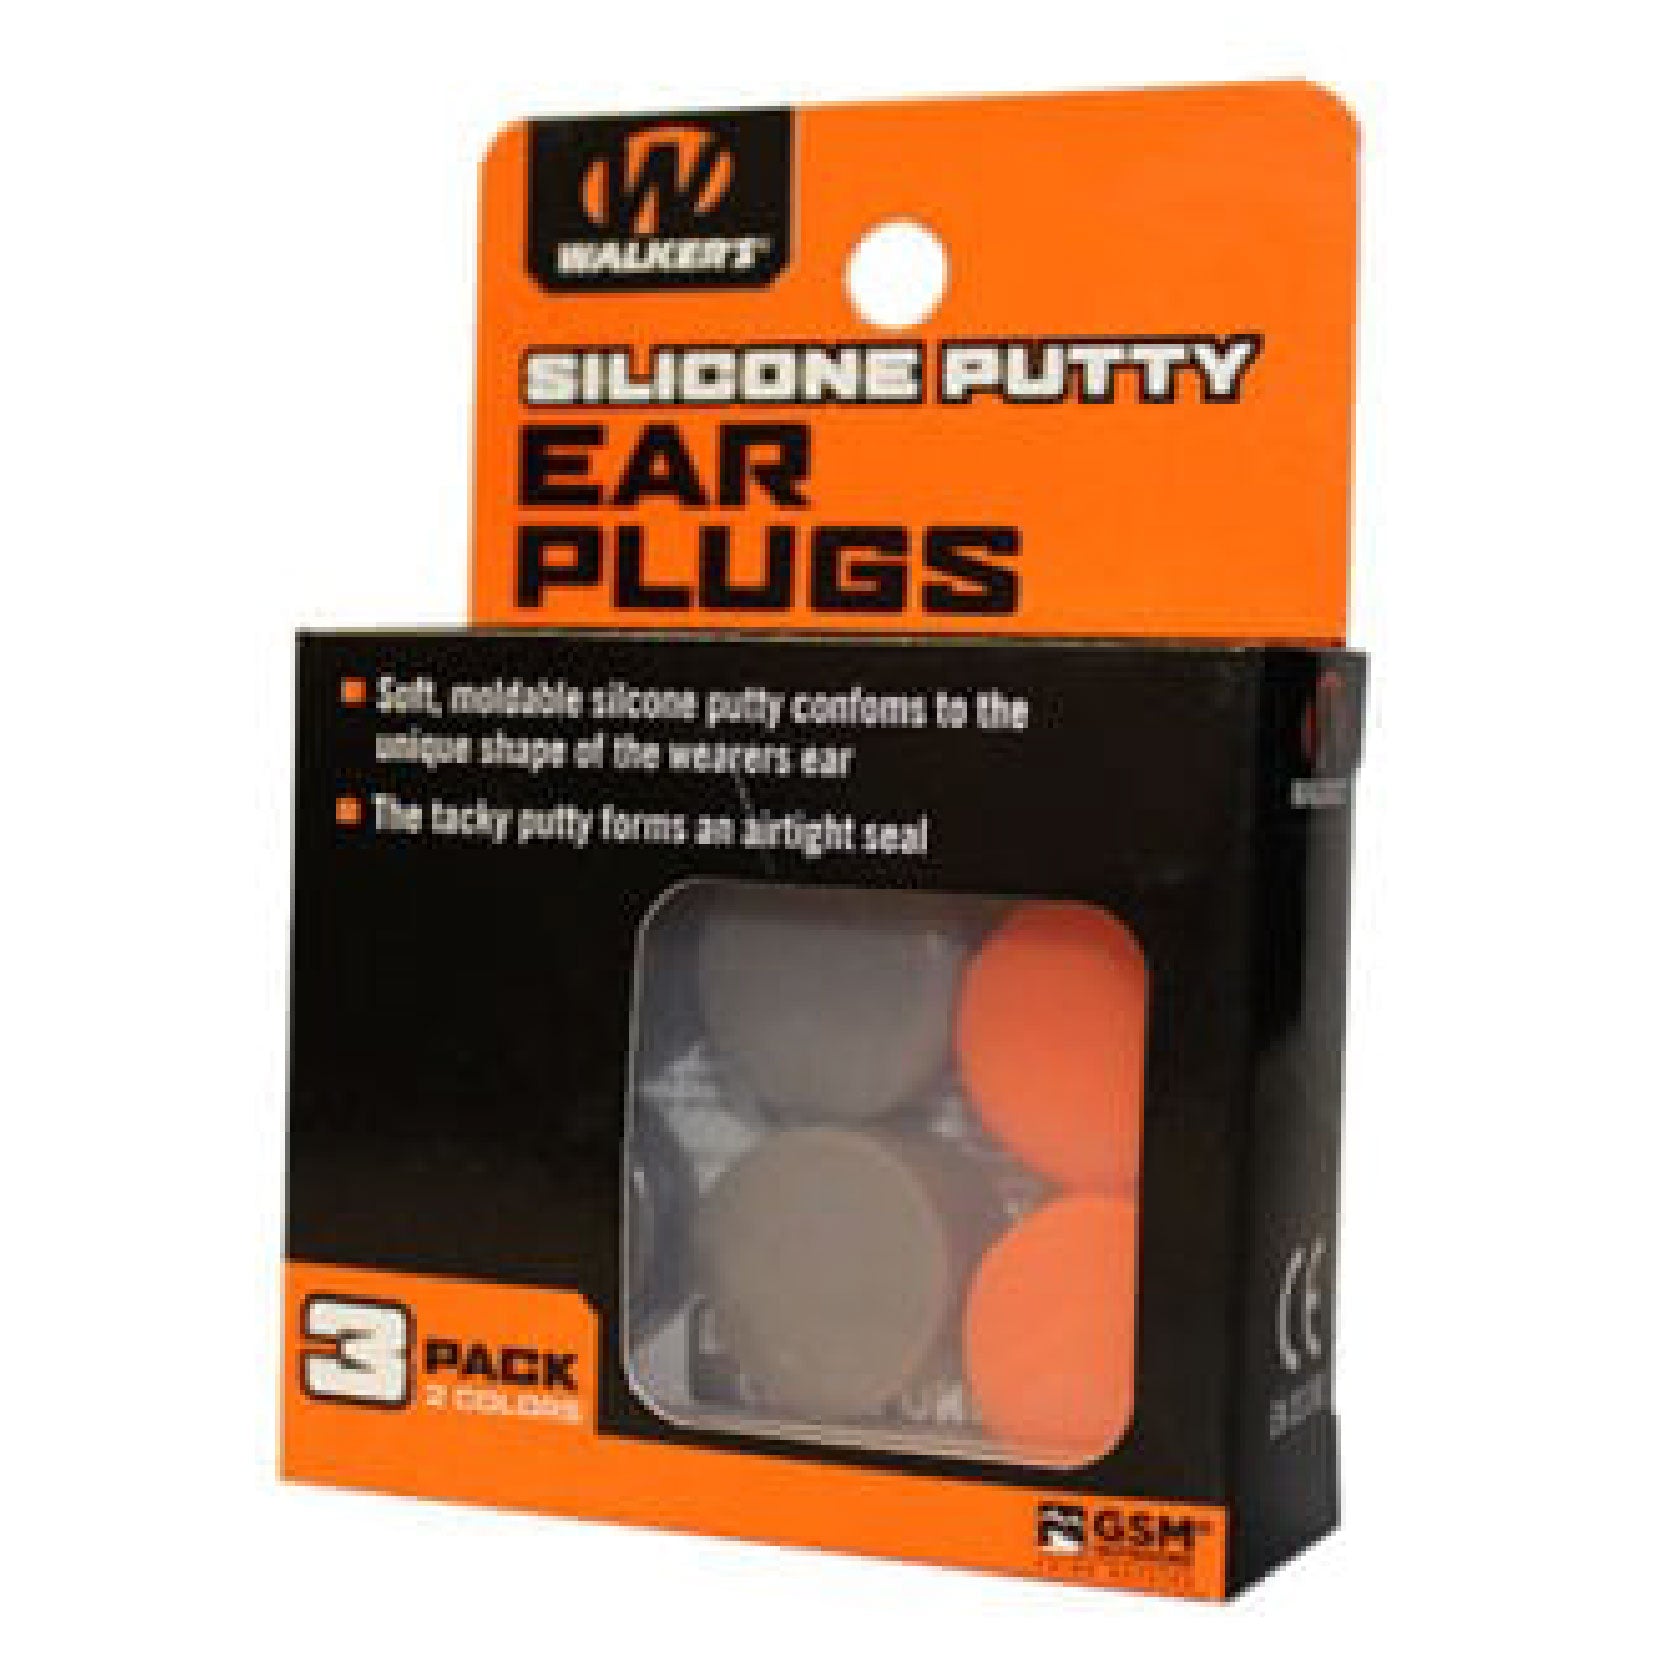 Walker's Silicone Putty Ear Plugs